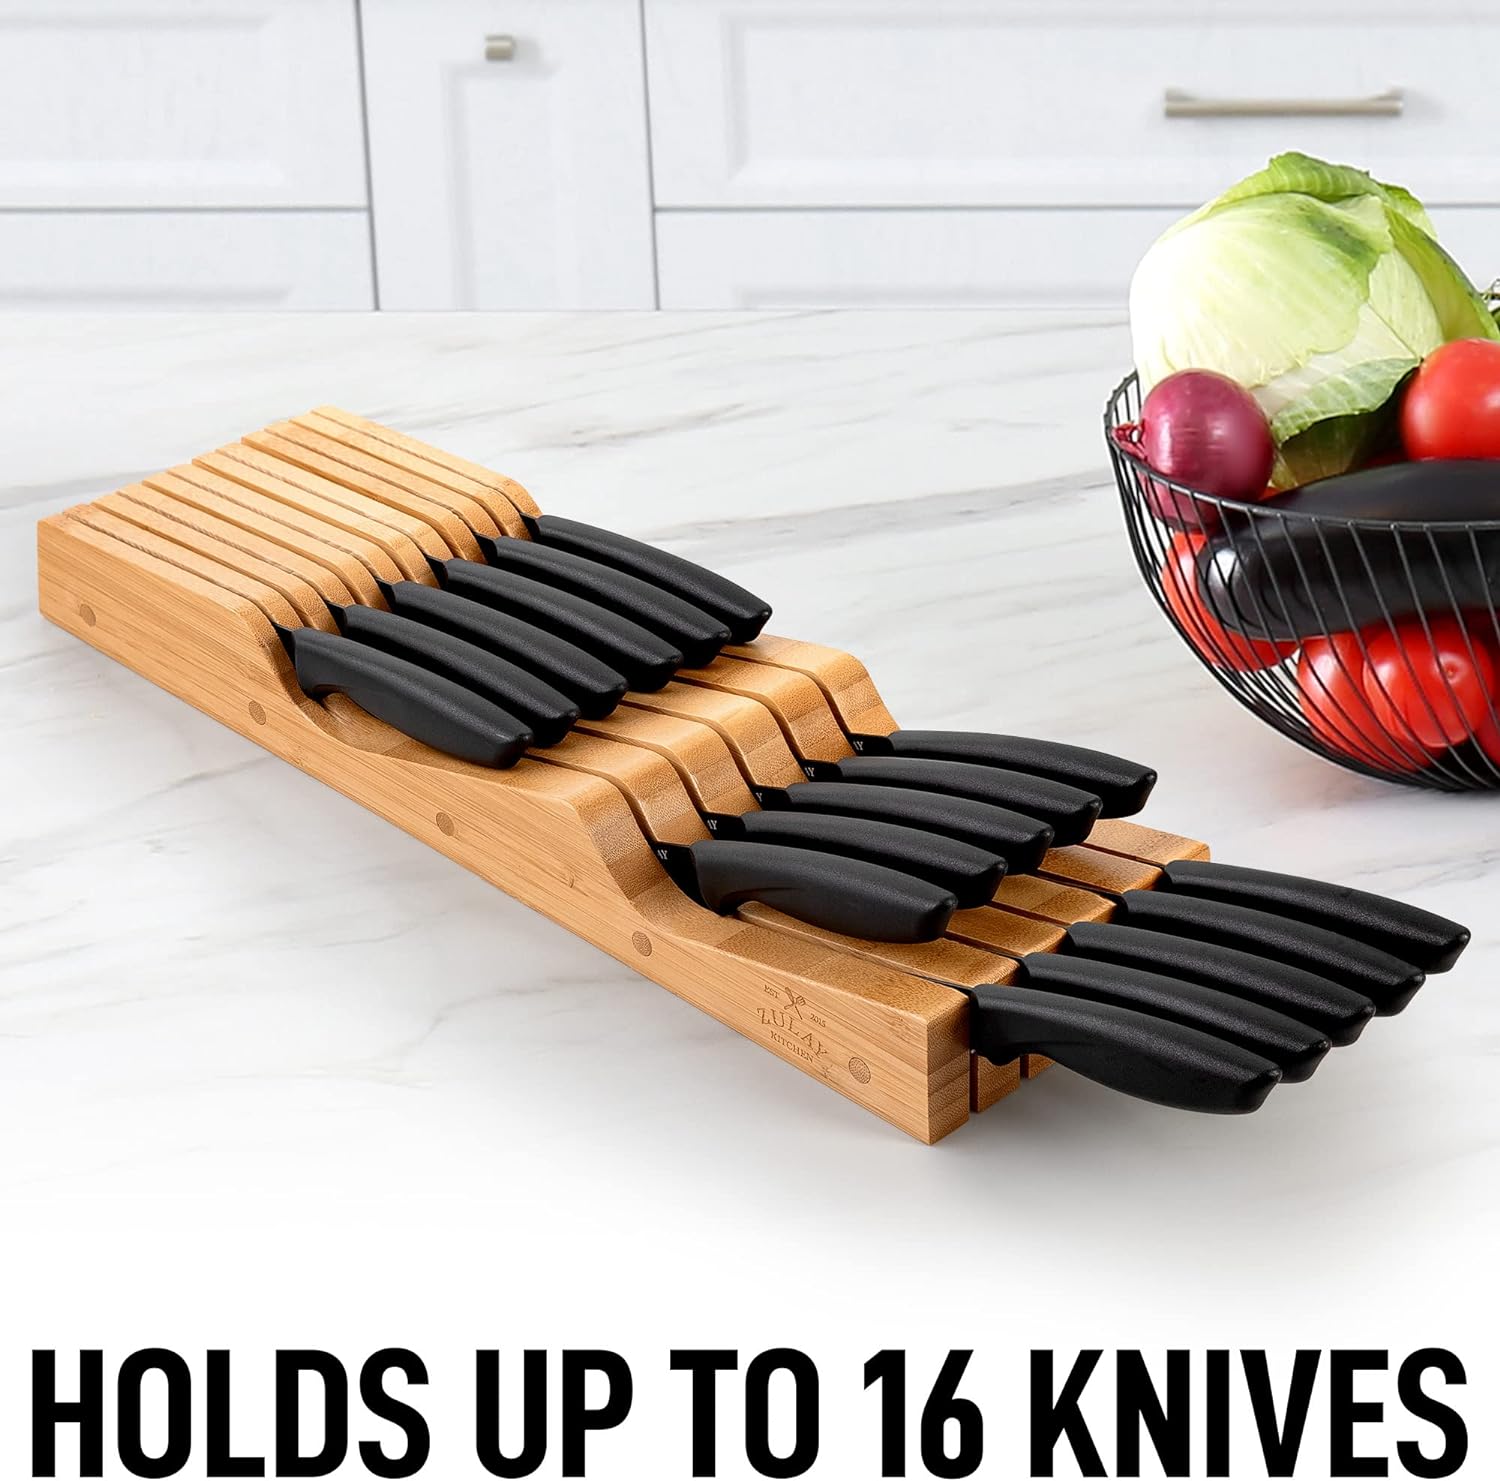 11 Piece Stainless Steel Kitchen Knife Set with In-Drawer Bamboo